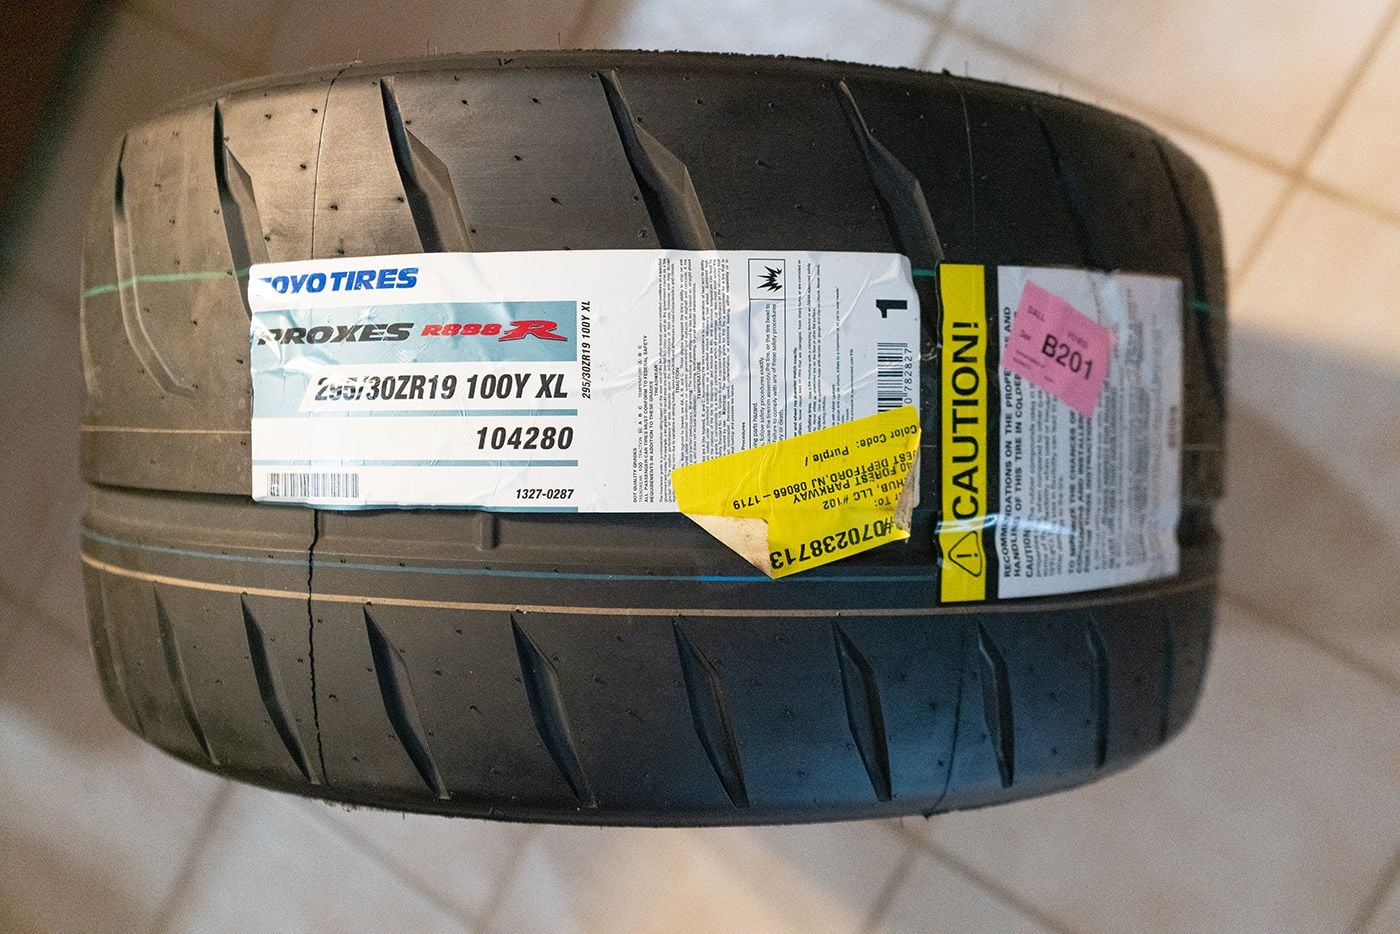 Wheels and Tires/Axles - Toyo R888R Tire - 295/30ZR19 - New - All Years Mercedes-Benz All Models - Dallas, TX 75227, United States